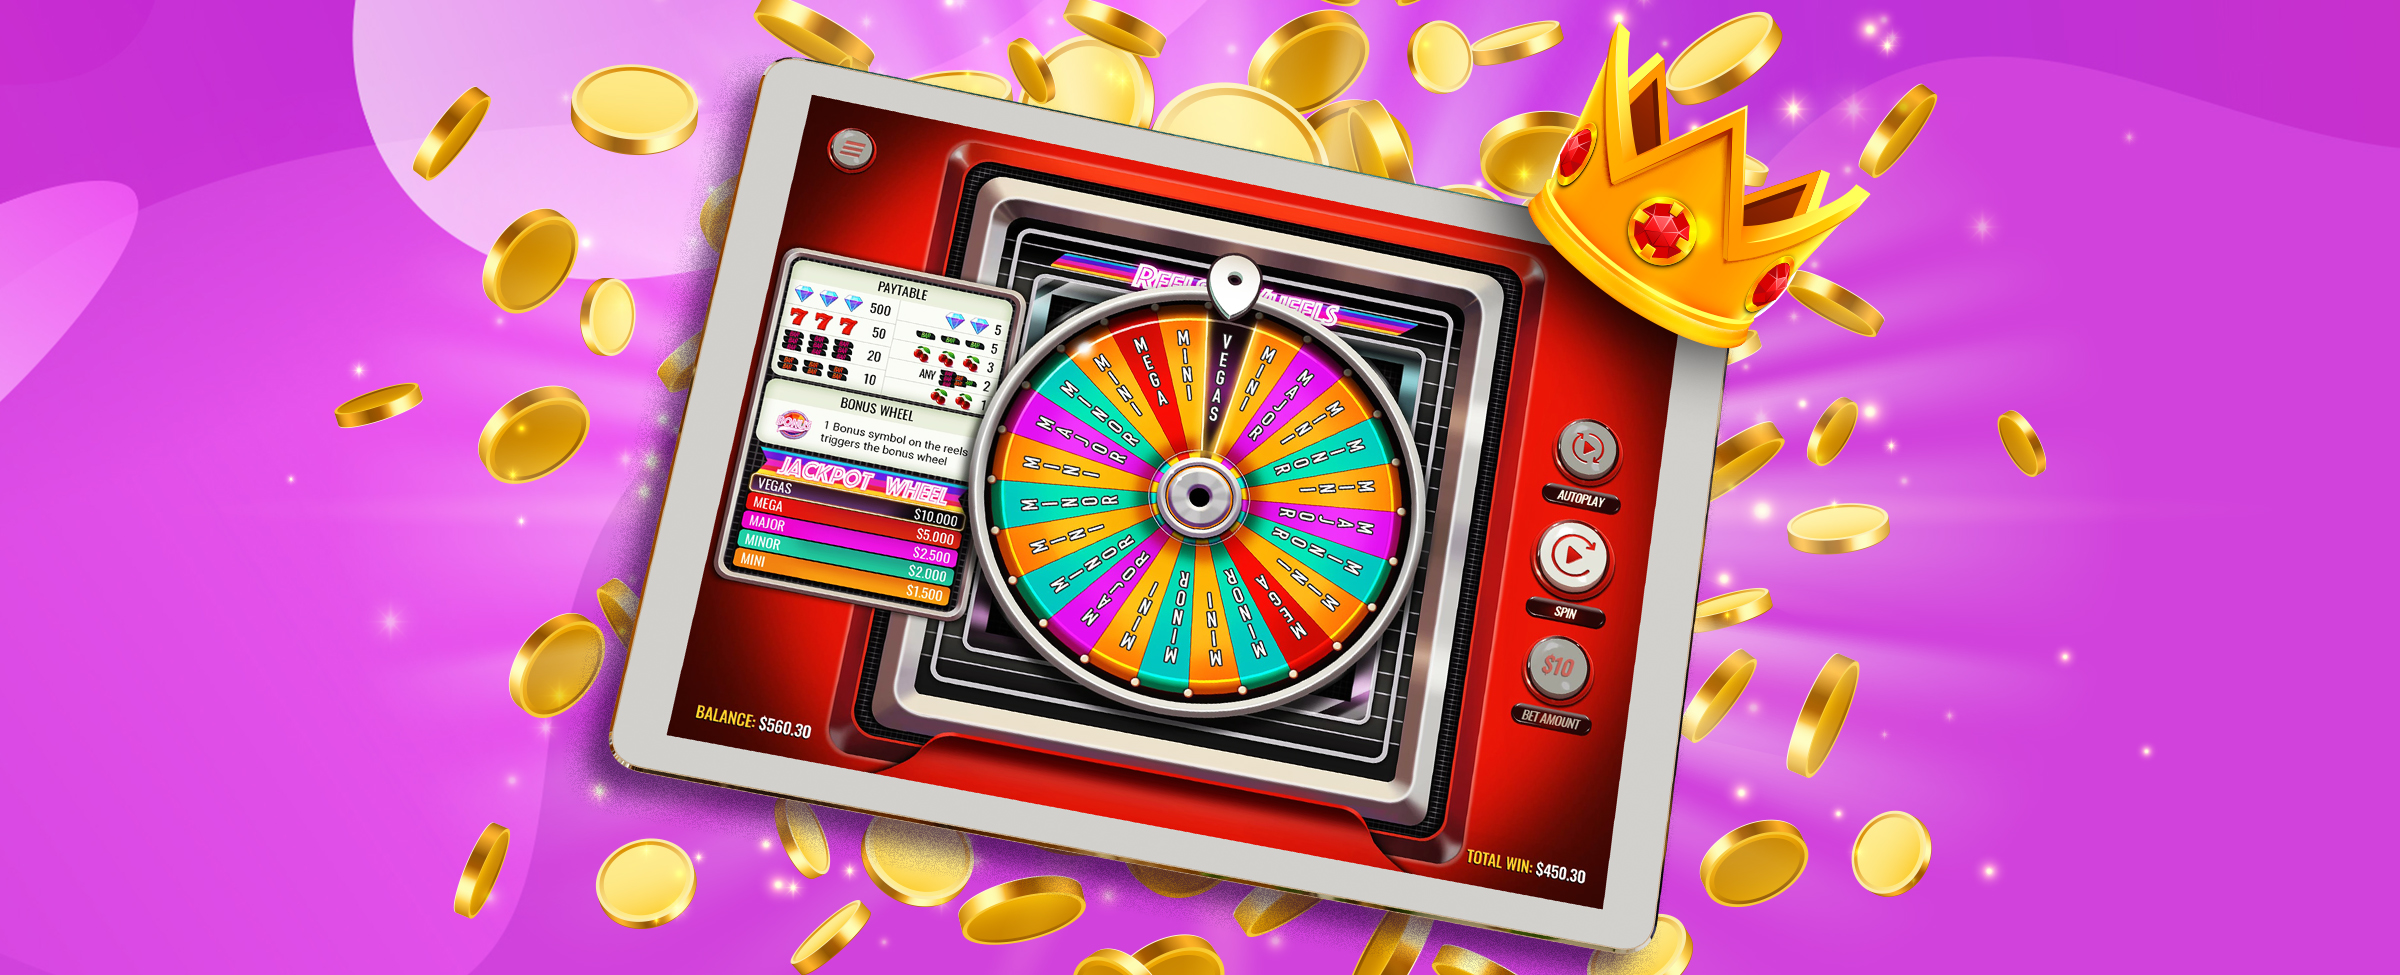 Reels and Wheels is one of the coolest slot games online, and we have it right here for your playing pleasure at SlotsLV. Give it a try!